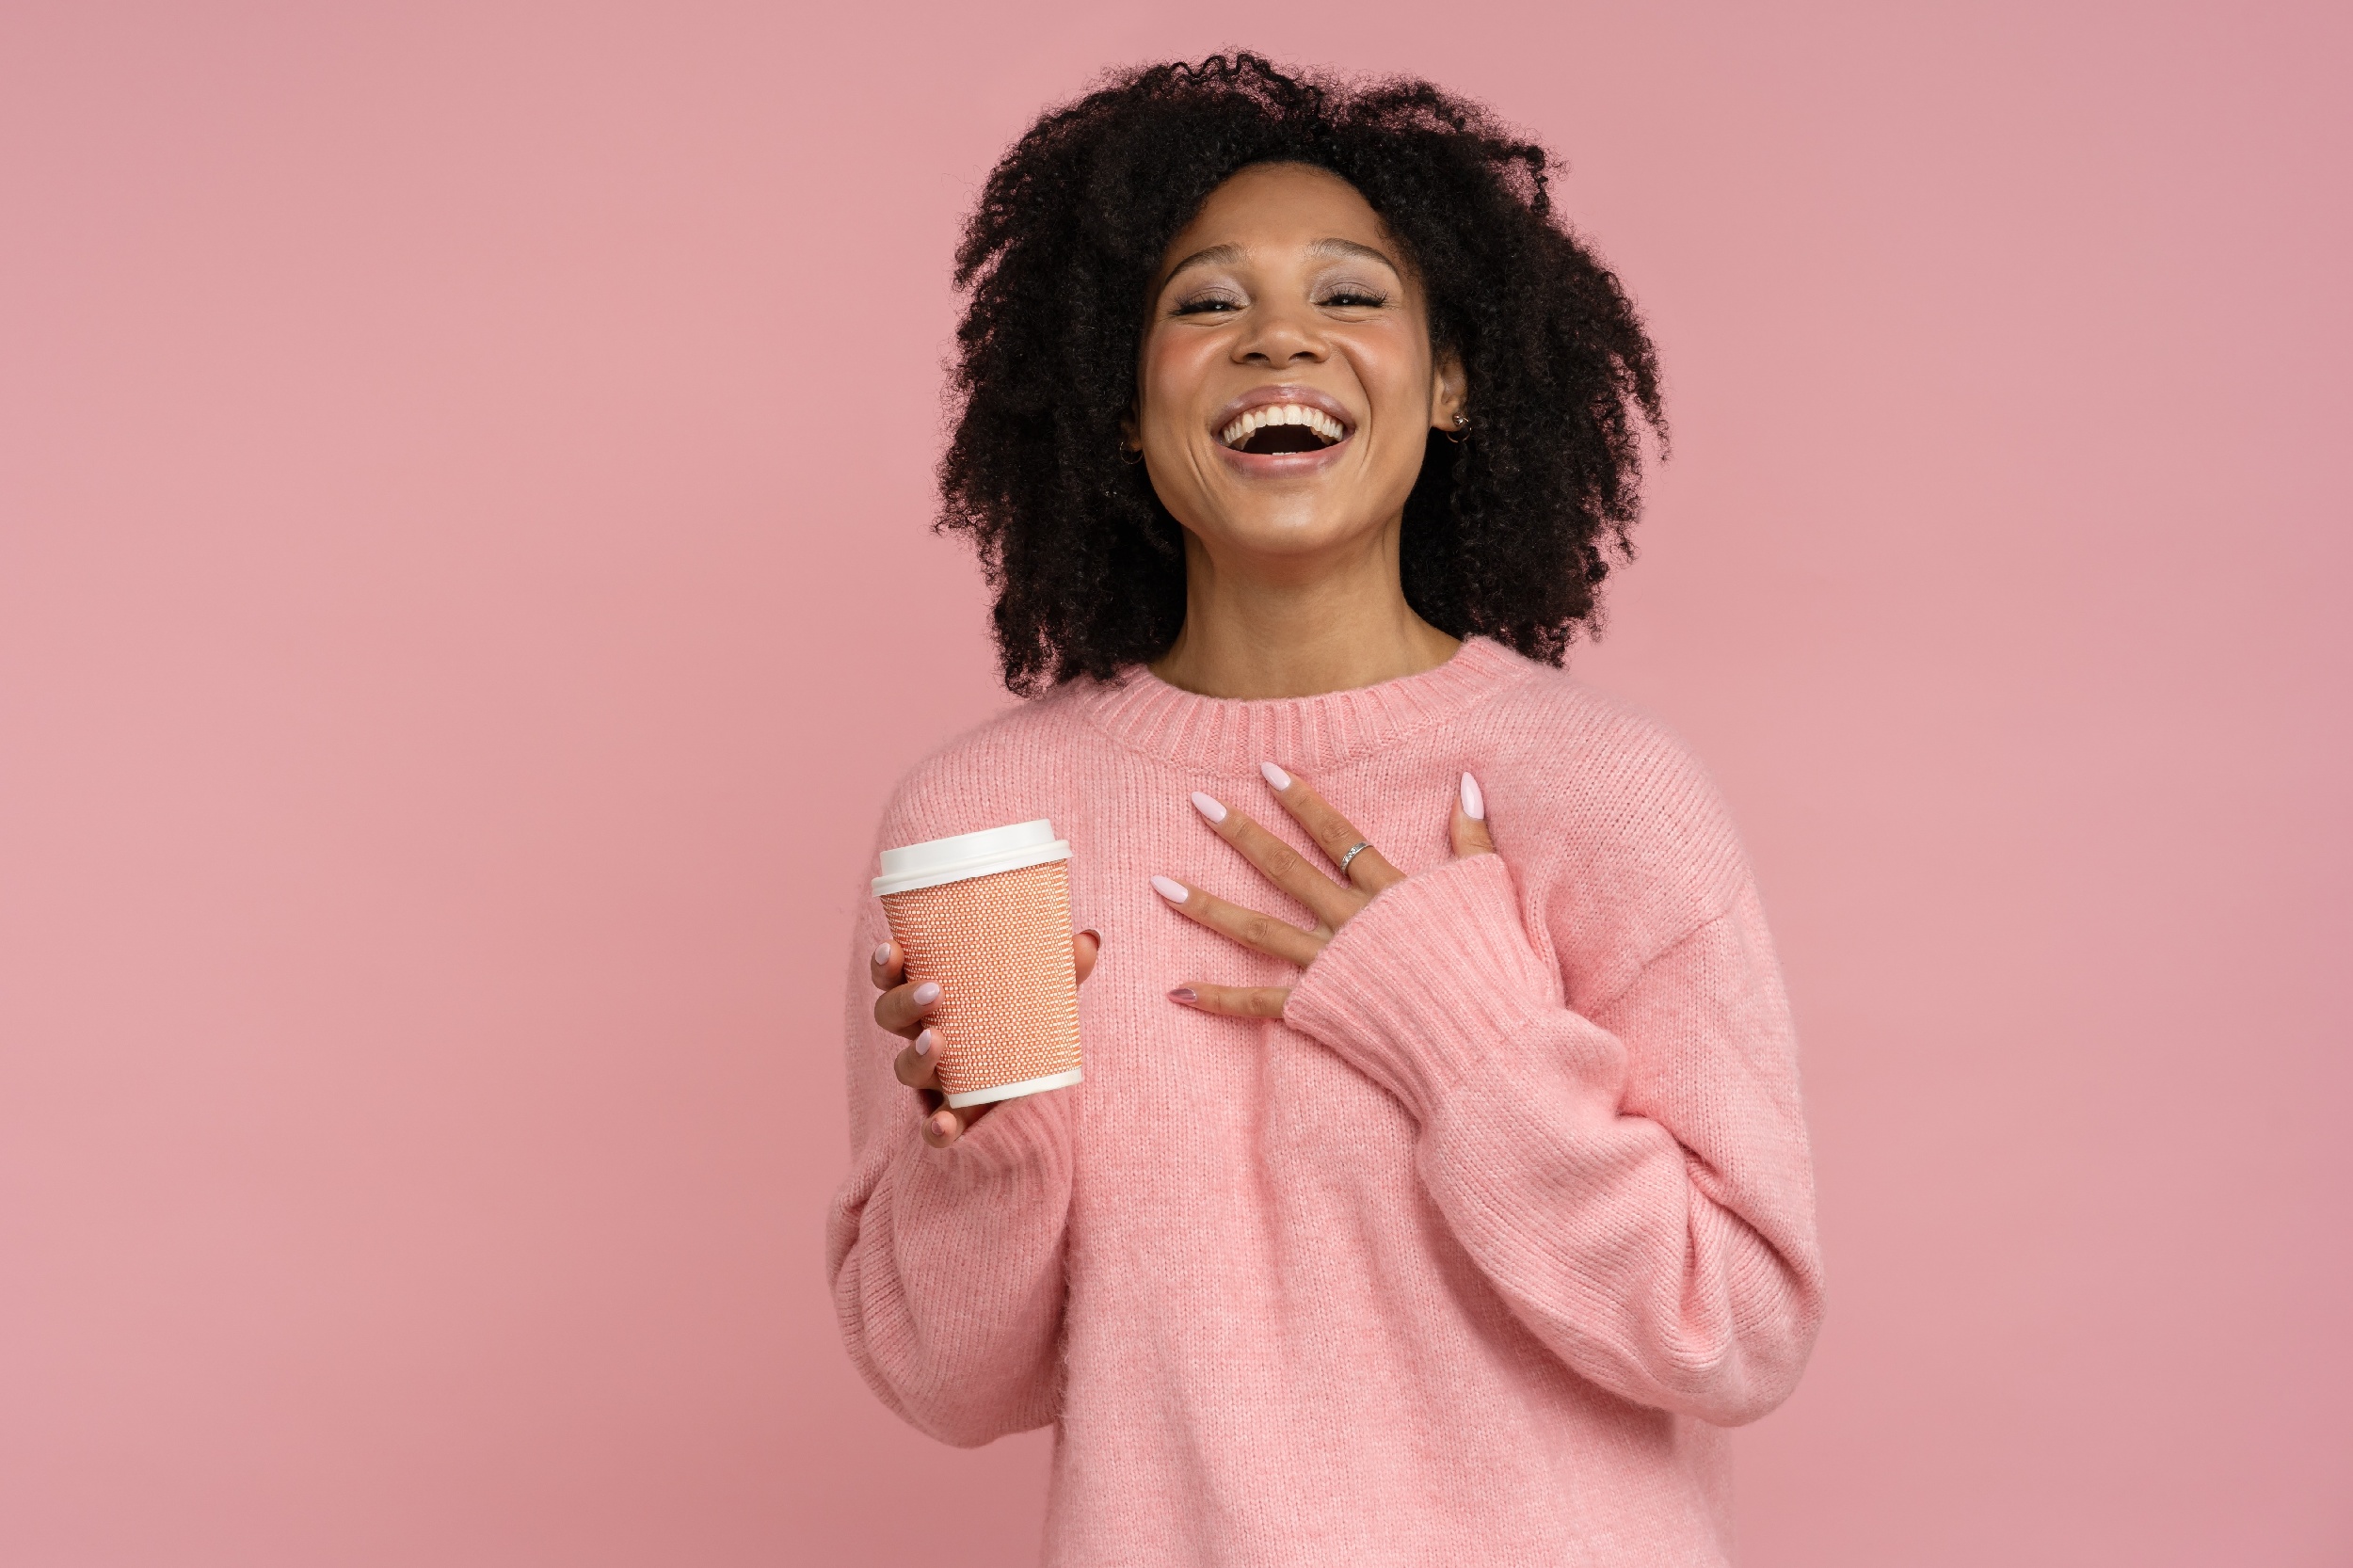 Smiling young black woman in a pink sweater holding a take-away coffee cup, against a pink background